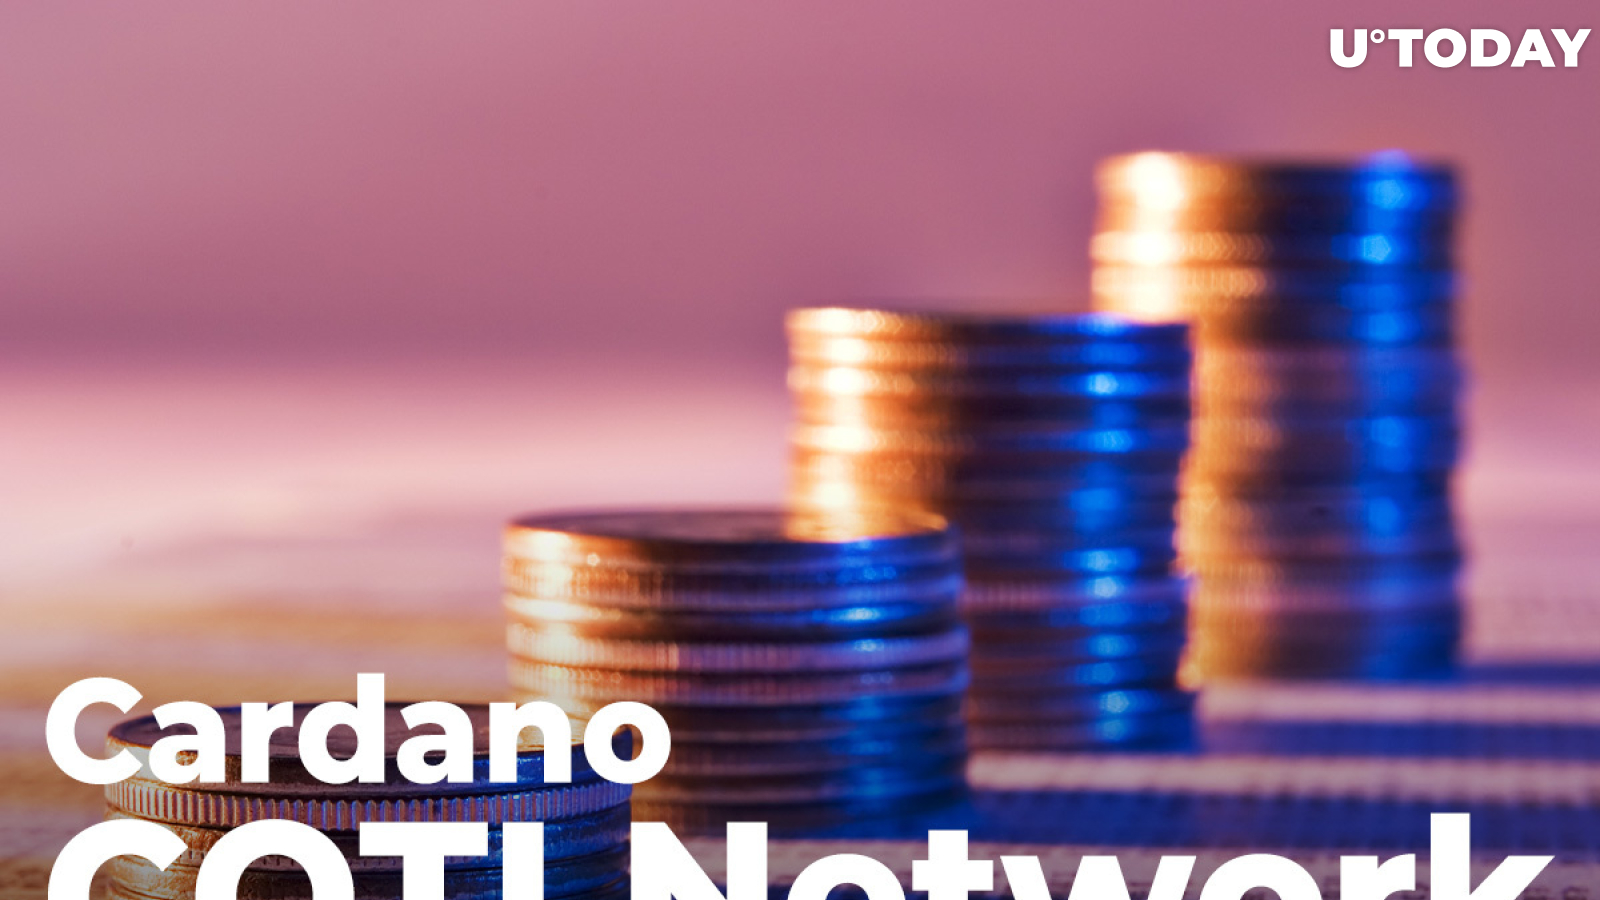 Cardano-Backed Venture Fund to Support COTI Network: Details